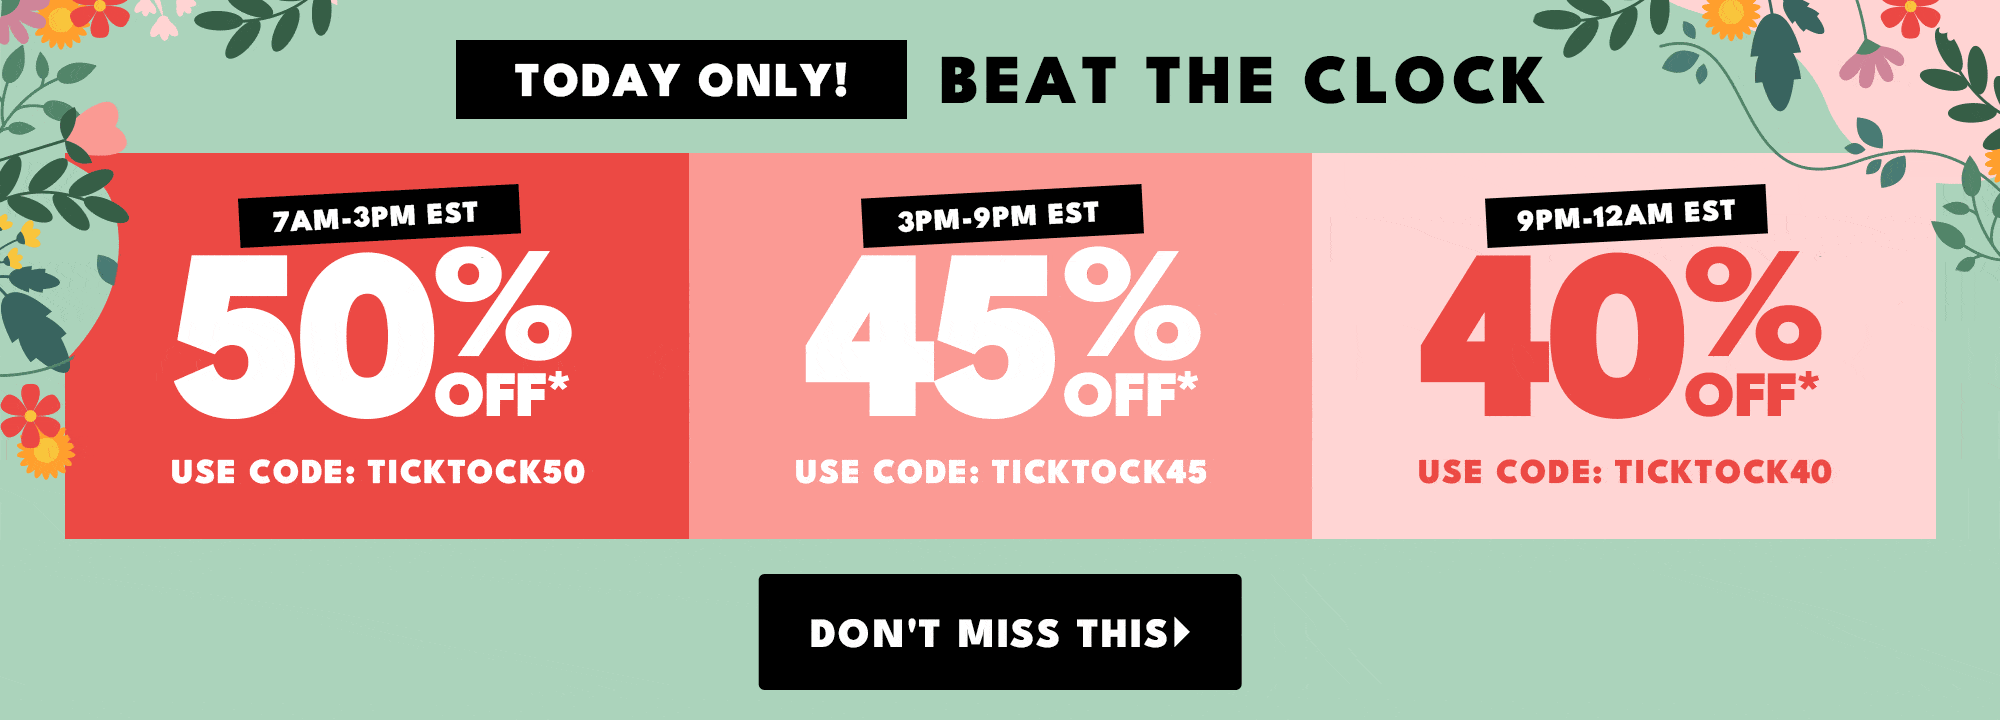 Today only! Beat the lock don't miss this